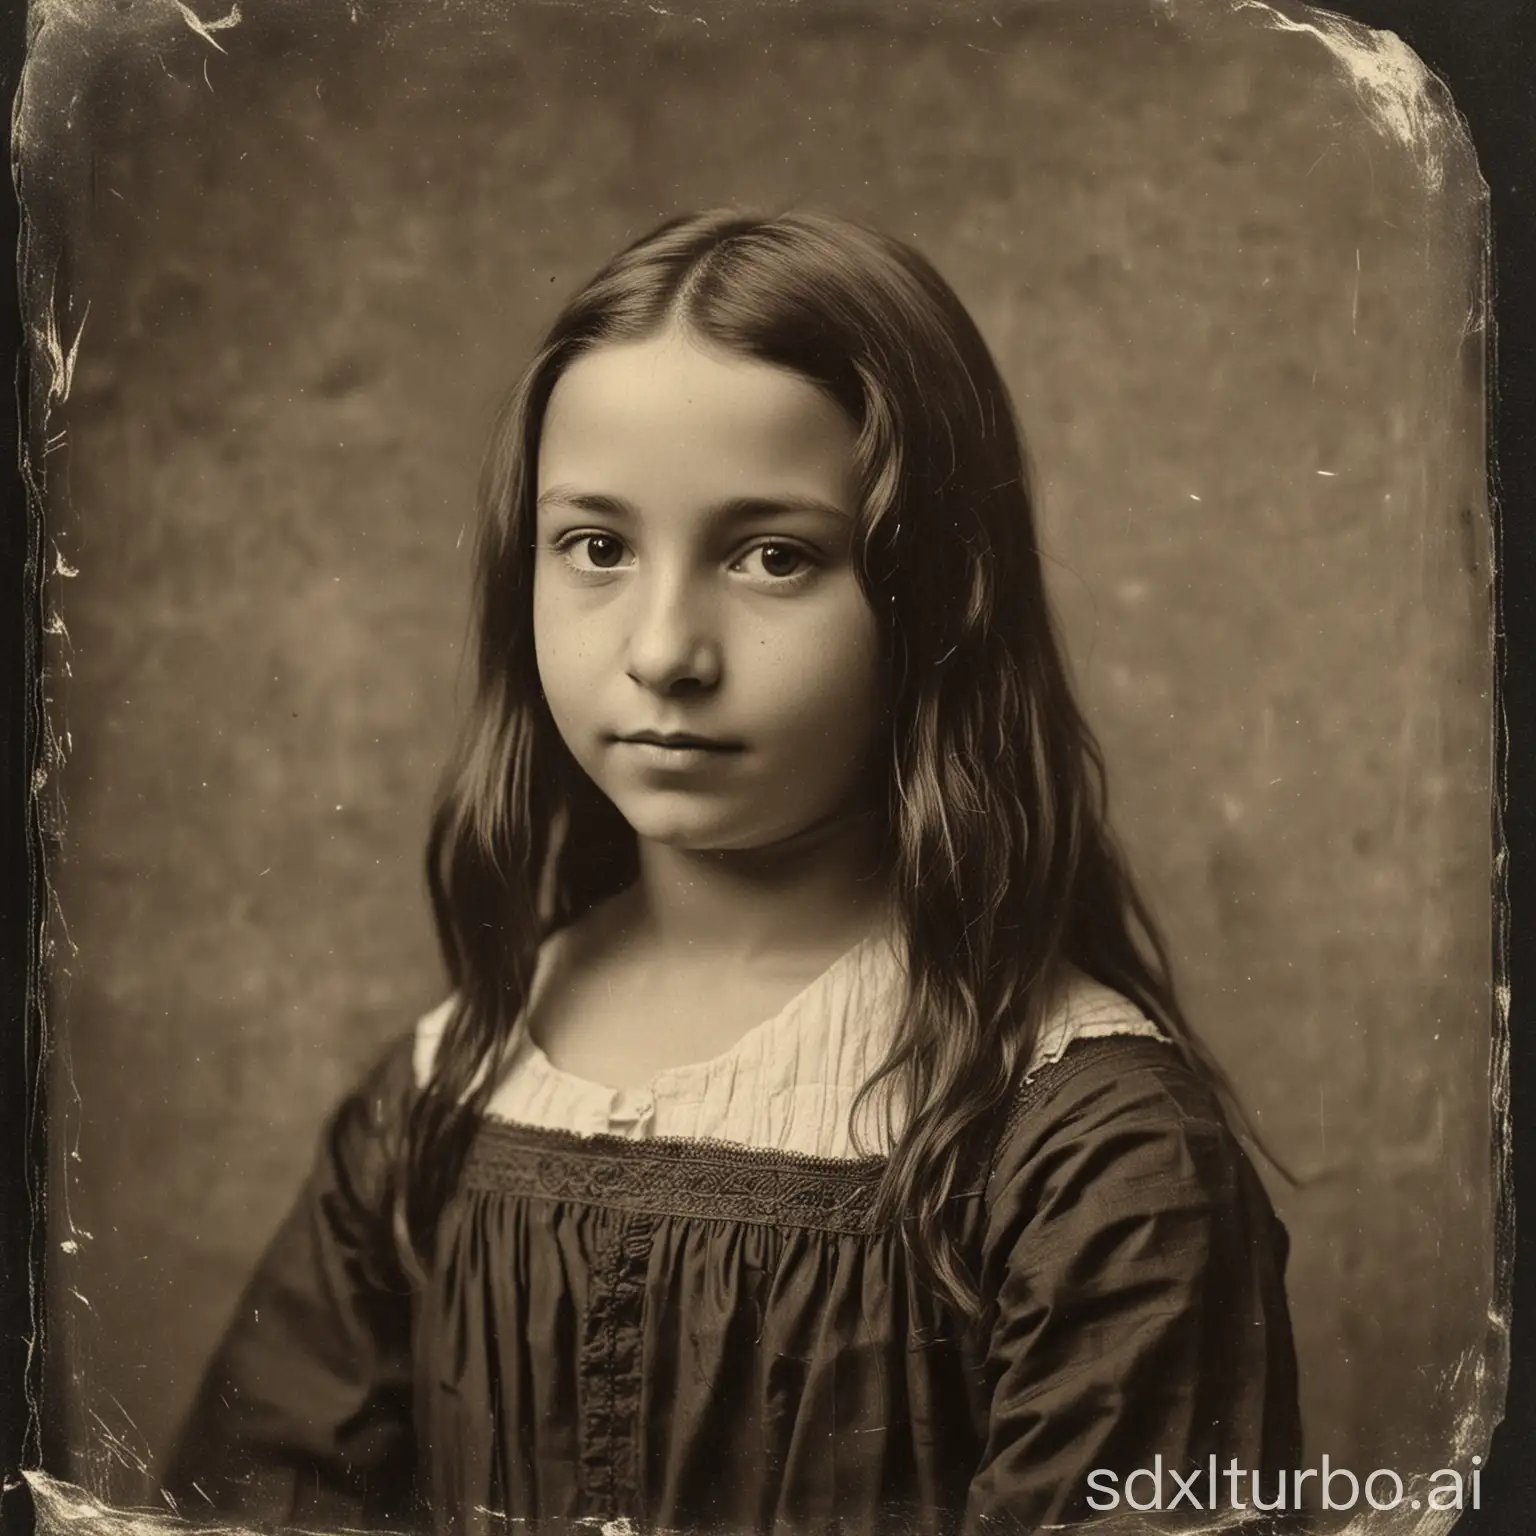 Old tintype photo taken in 1870 of a 12 yo girl resembling Mona Lisa. Scratches due to age of photo.